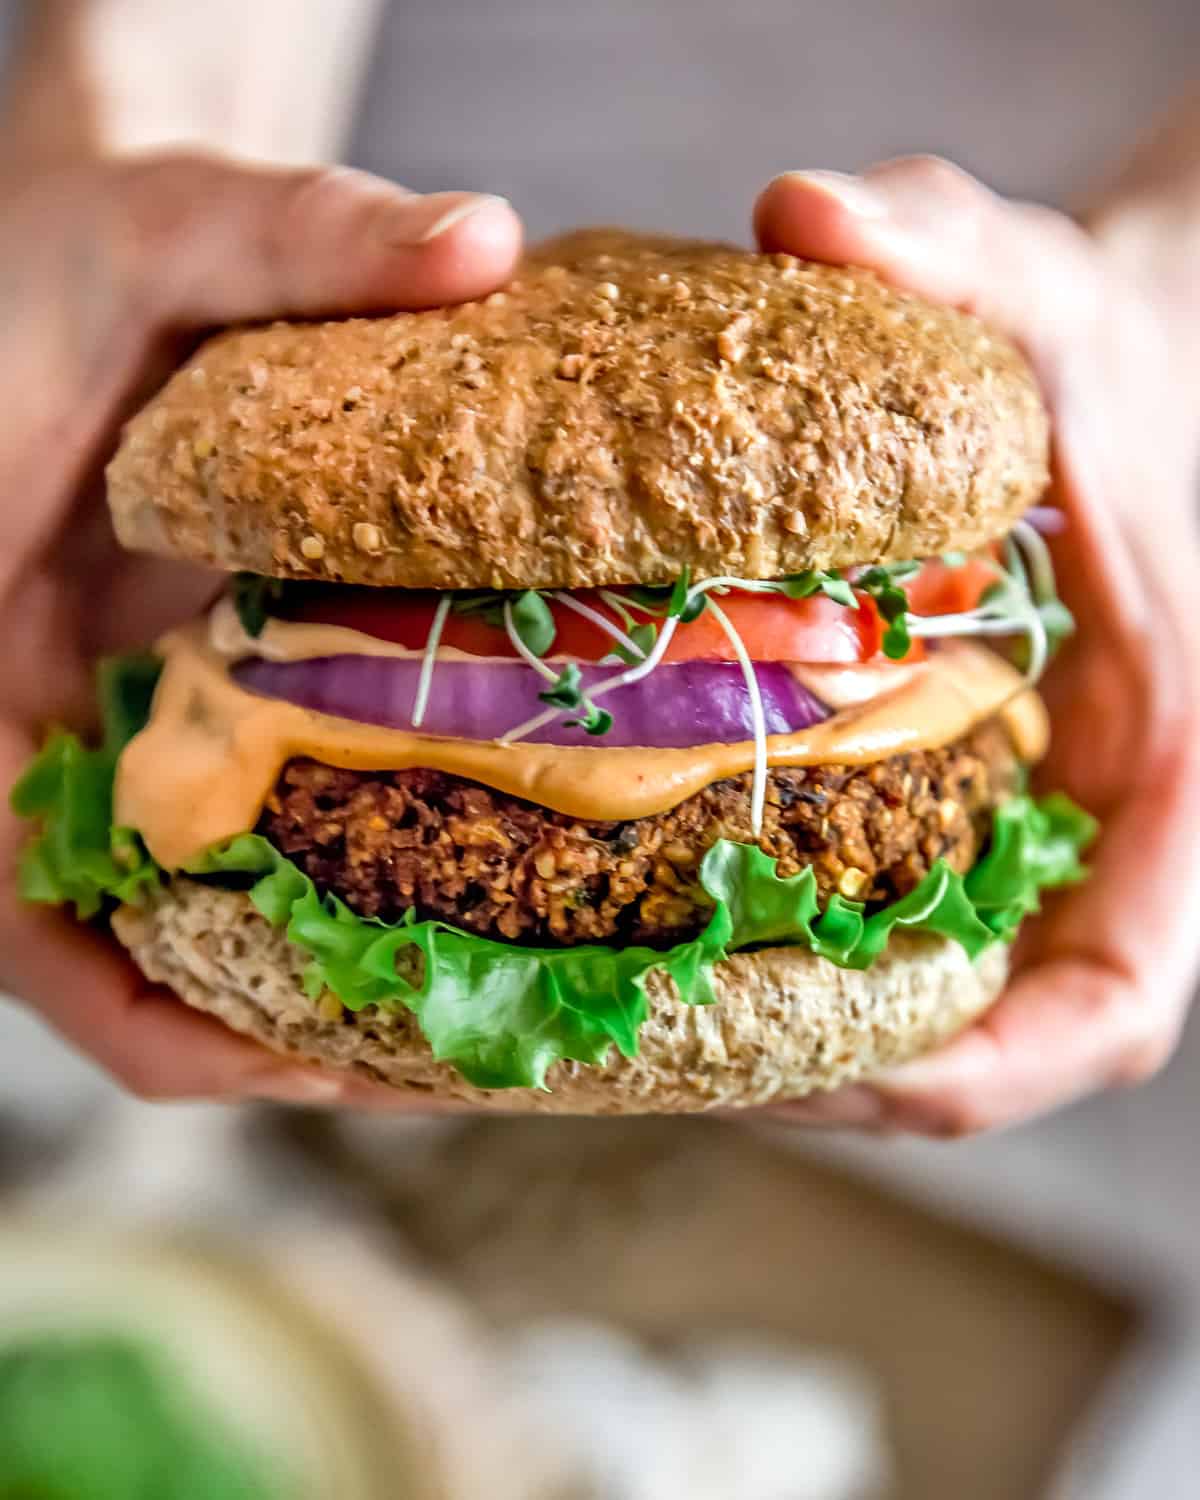 Holding the Ultimate Healthy Vegan Black Bean Burger with Special Burger Sauce